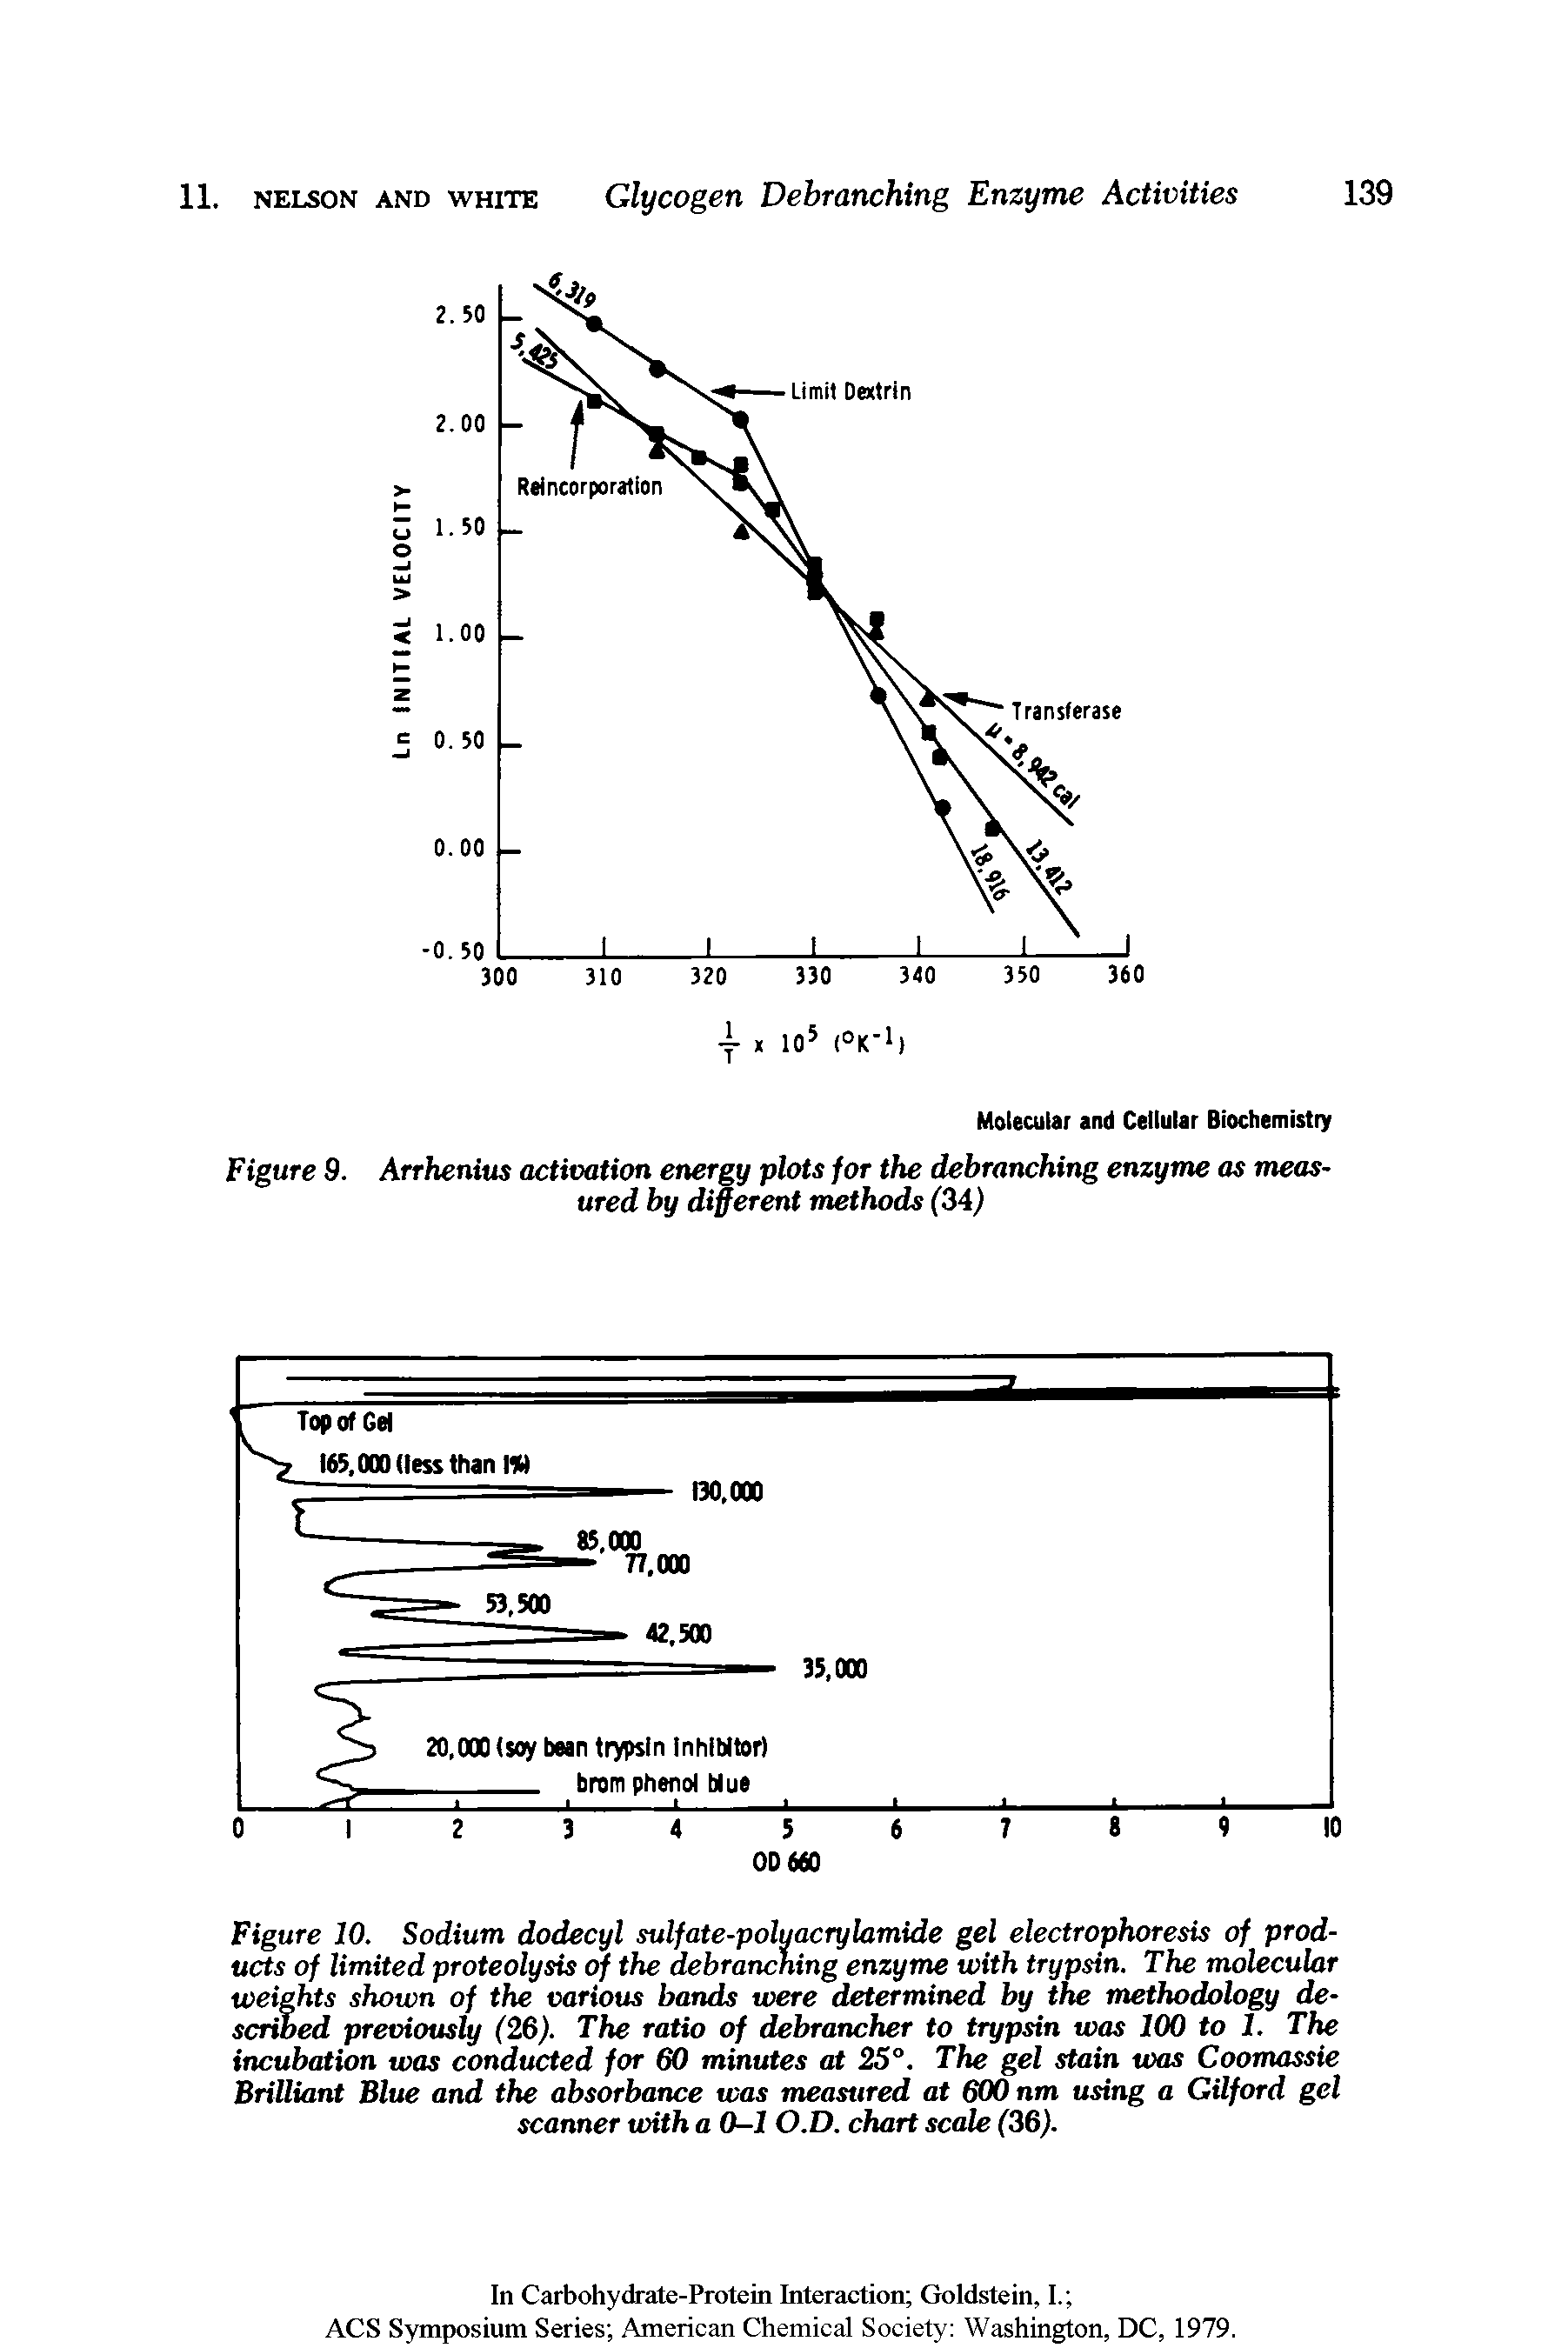 Figure 10. Sodium dodecyl sulfate-polyacrylamide gel electrophoresis of products of limited proteolysis of the debranching enzyme with trypsin. The molecular weights shown of the various bands were determined by the methodology described previously (26). The ratio of debrancher to trypsin was 100 to 1. The incubation was conducted for 60 minutes at 25°. The gel stain was Coomassie Brilliant Blue and the absorbance was measured at 600 nm using a Gilford gel scanner with a 0-1 O.D. chart scale (36).